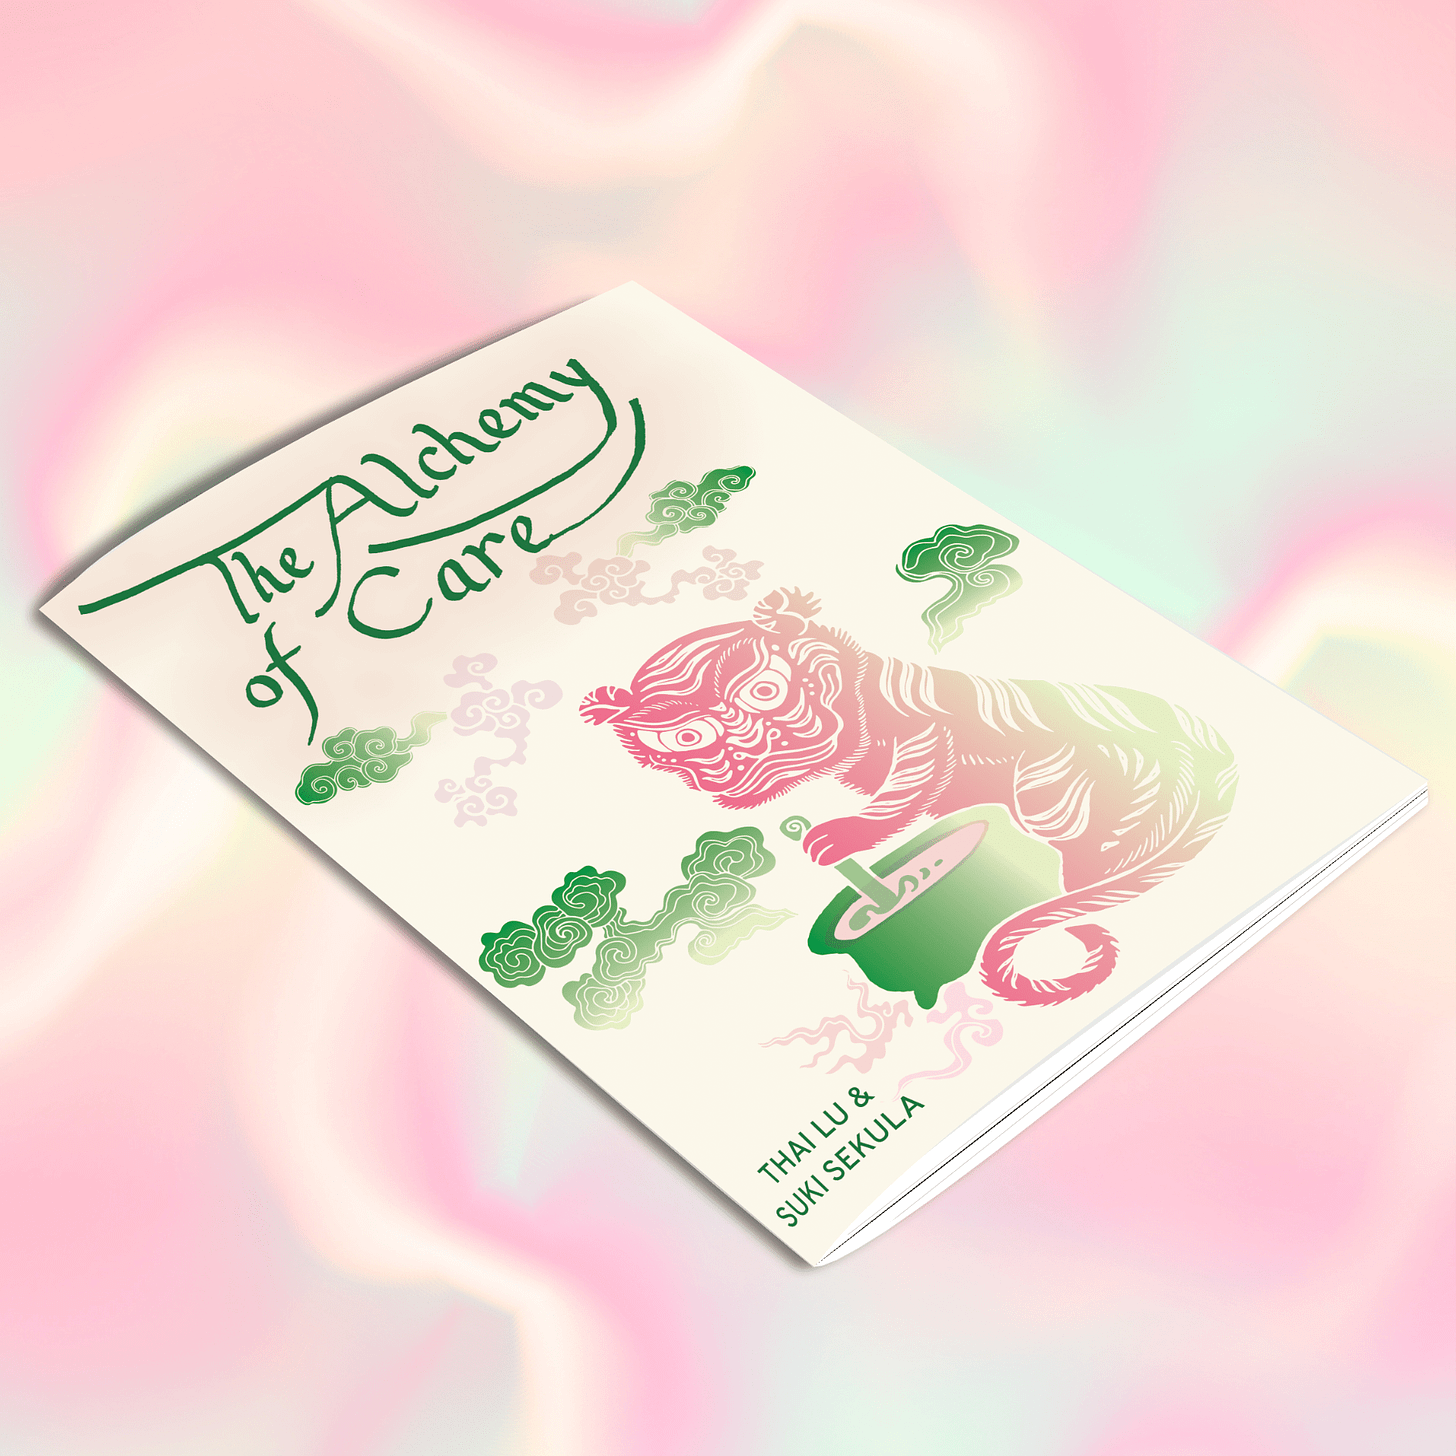 Book cover with pink tiger and green background